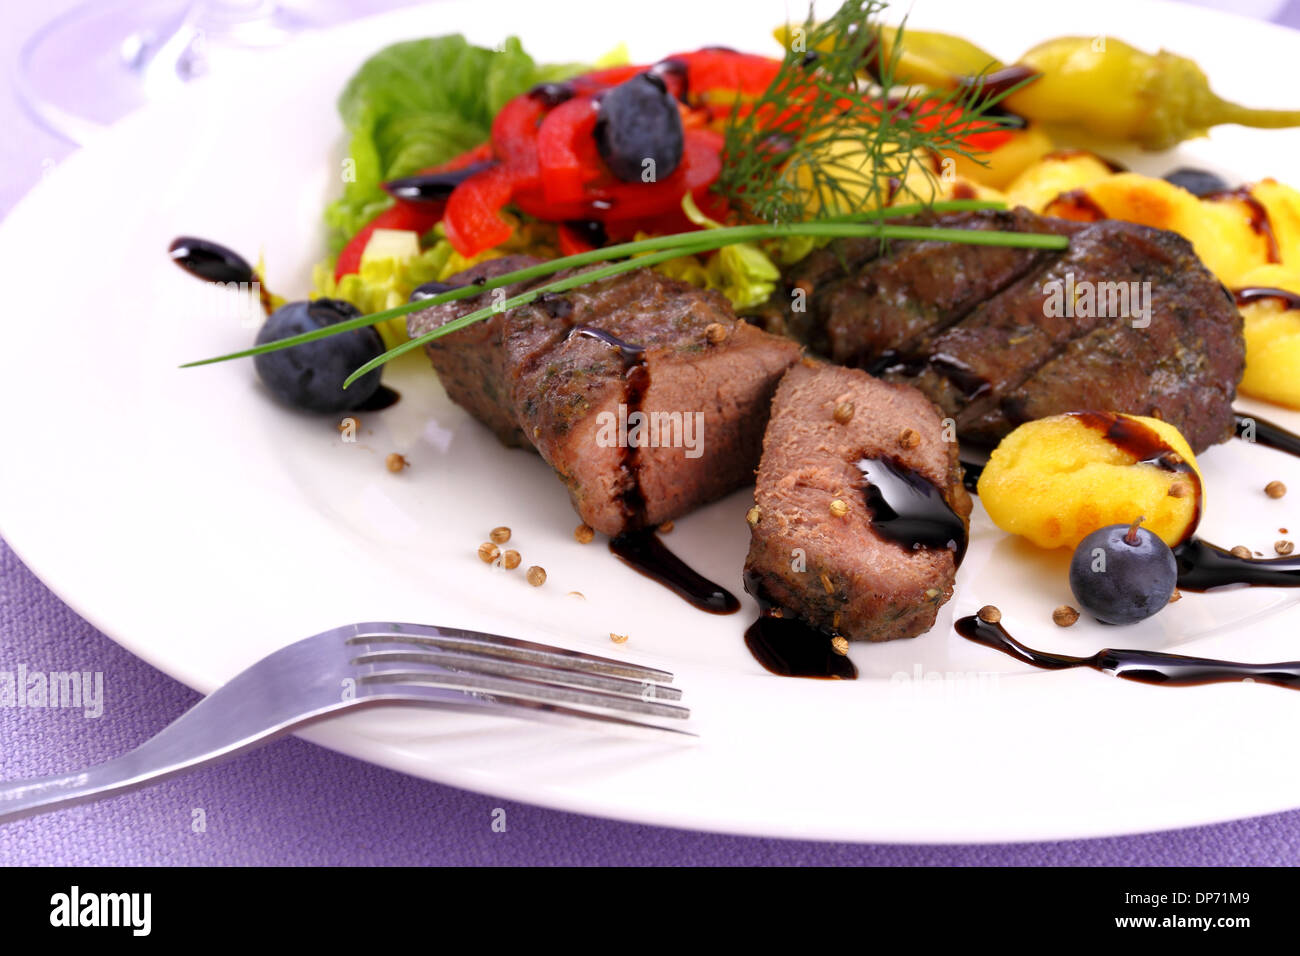 Lamb steak with potato, vegetable and black sauce, close up Stock Photo